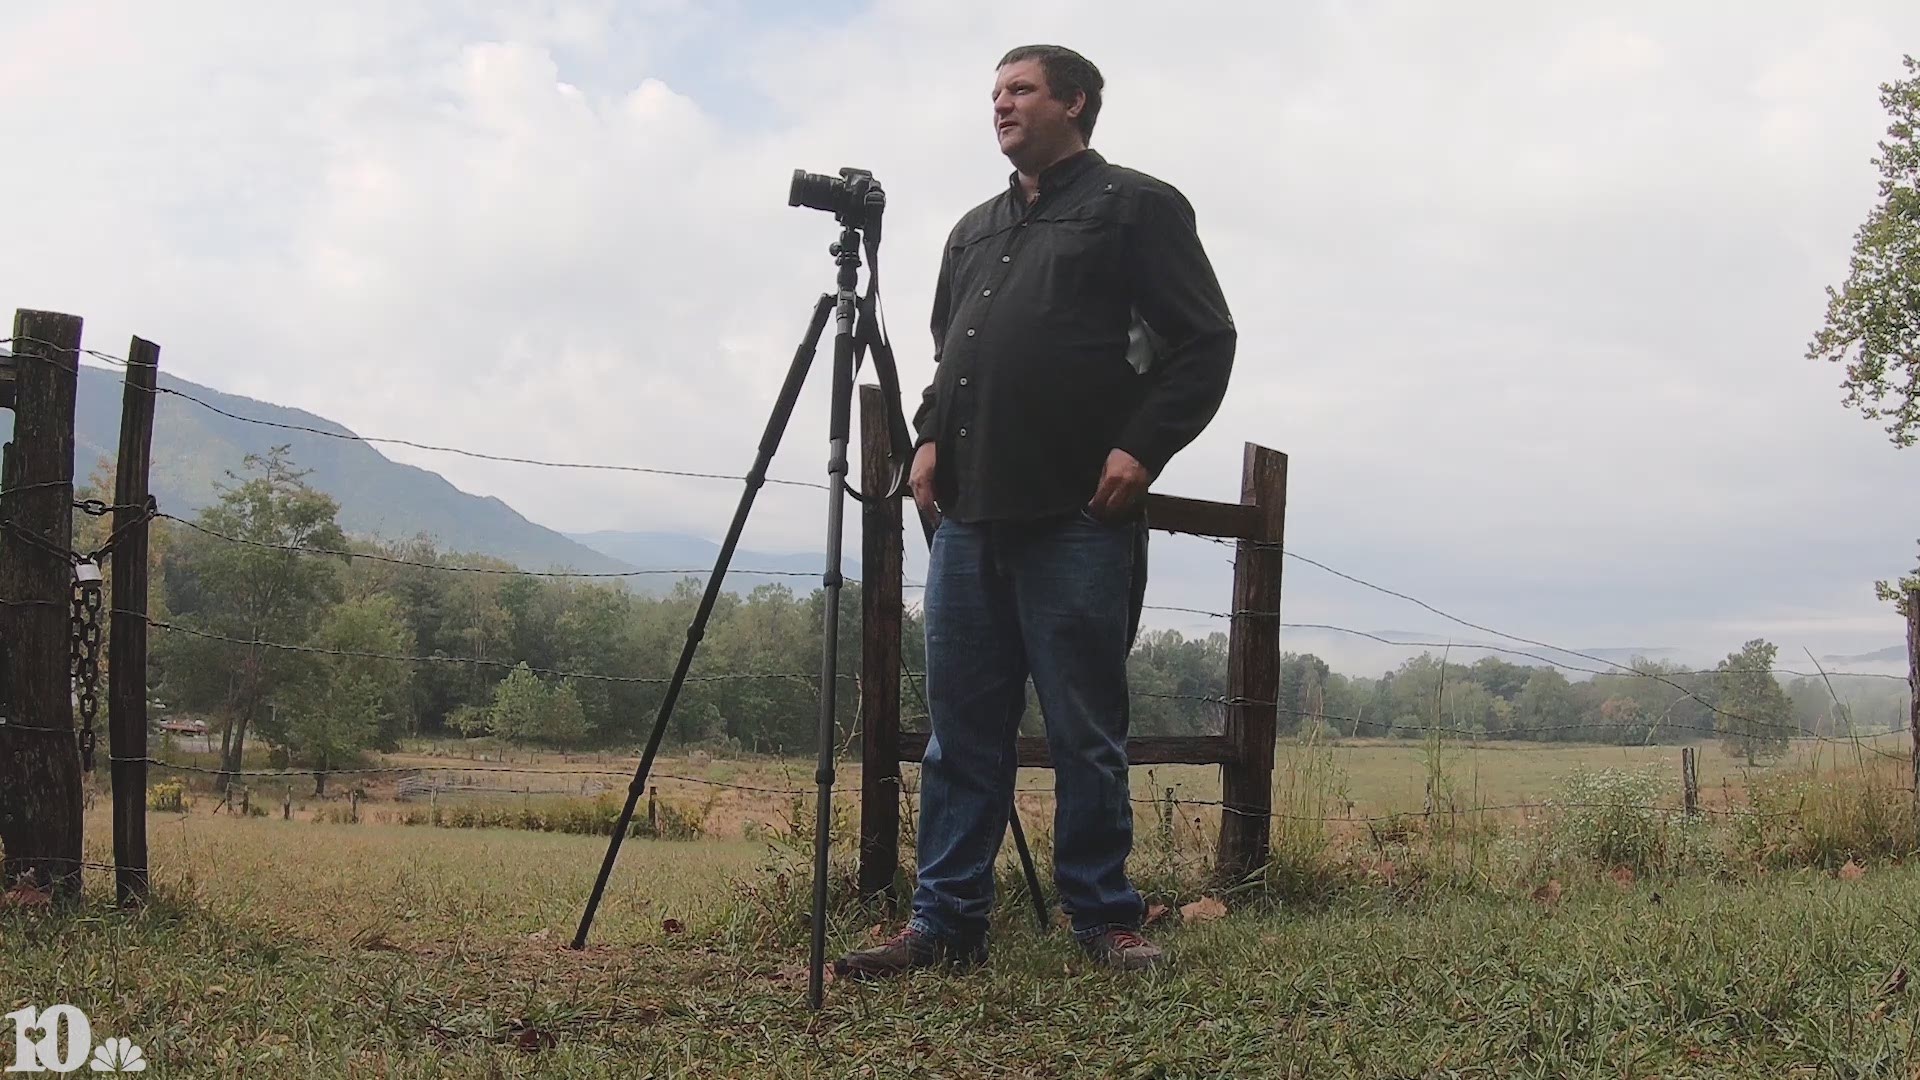 When a photographer told him locals didn't help outsiders, Nate Nelson created his own business to help everyone capture the beauty of the Great Smoky Mountains.